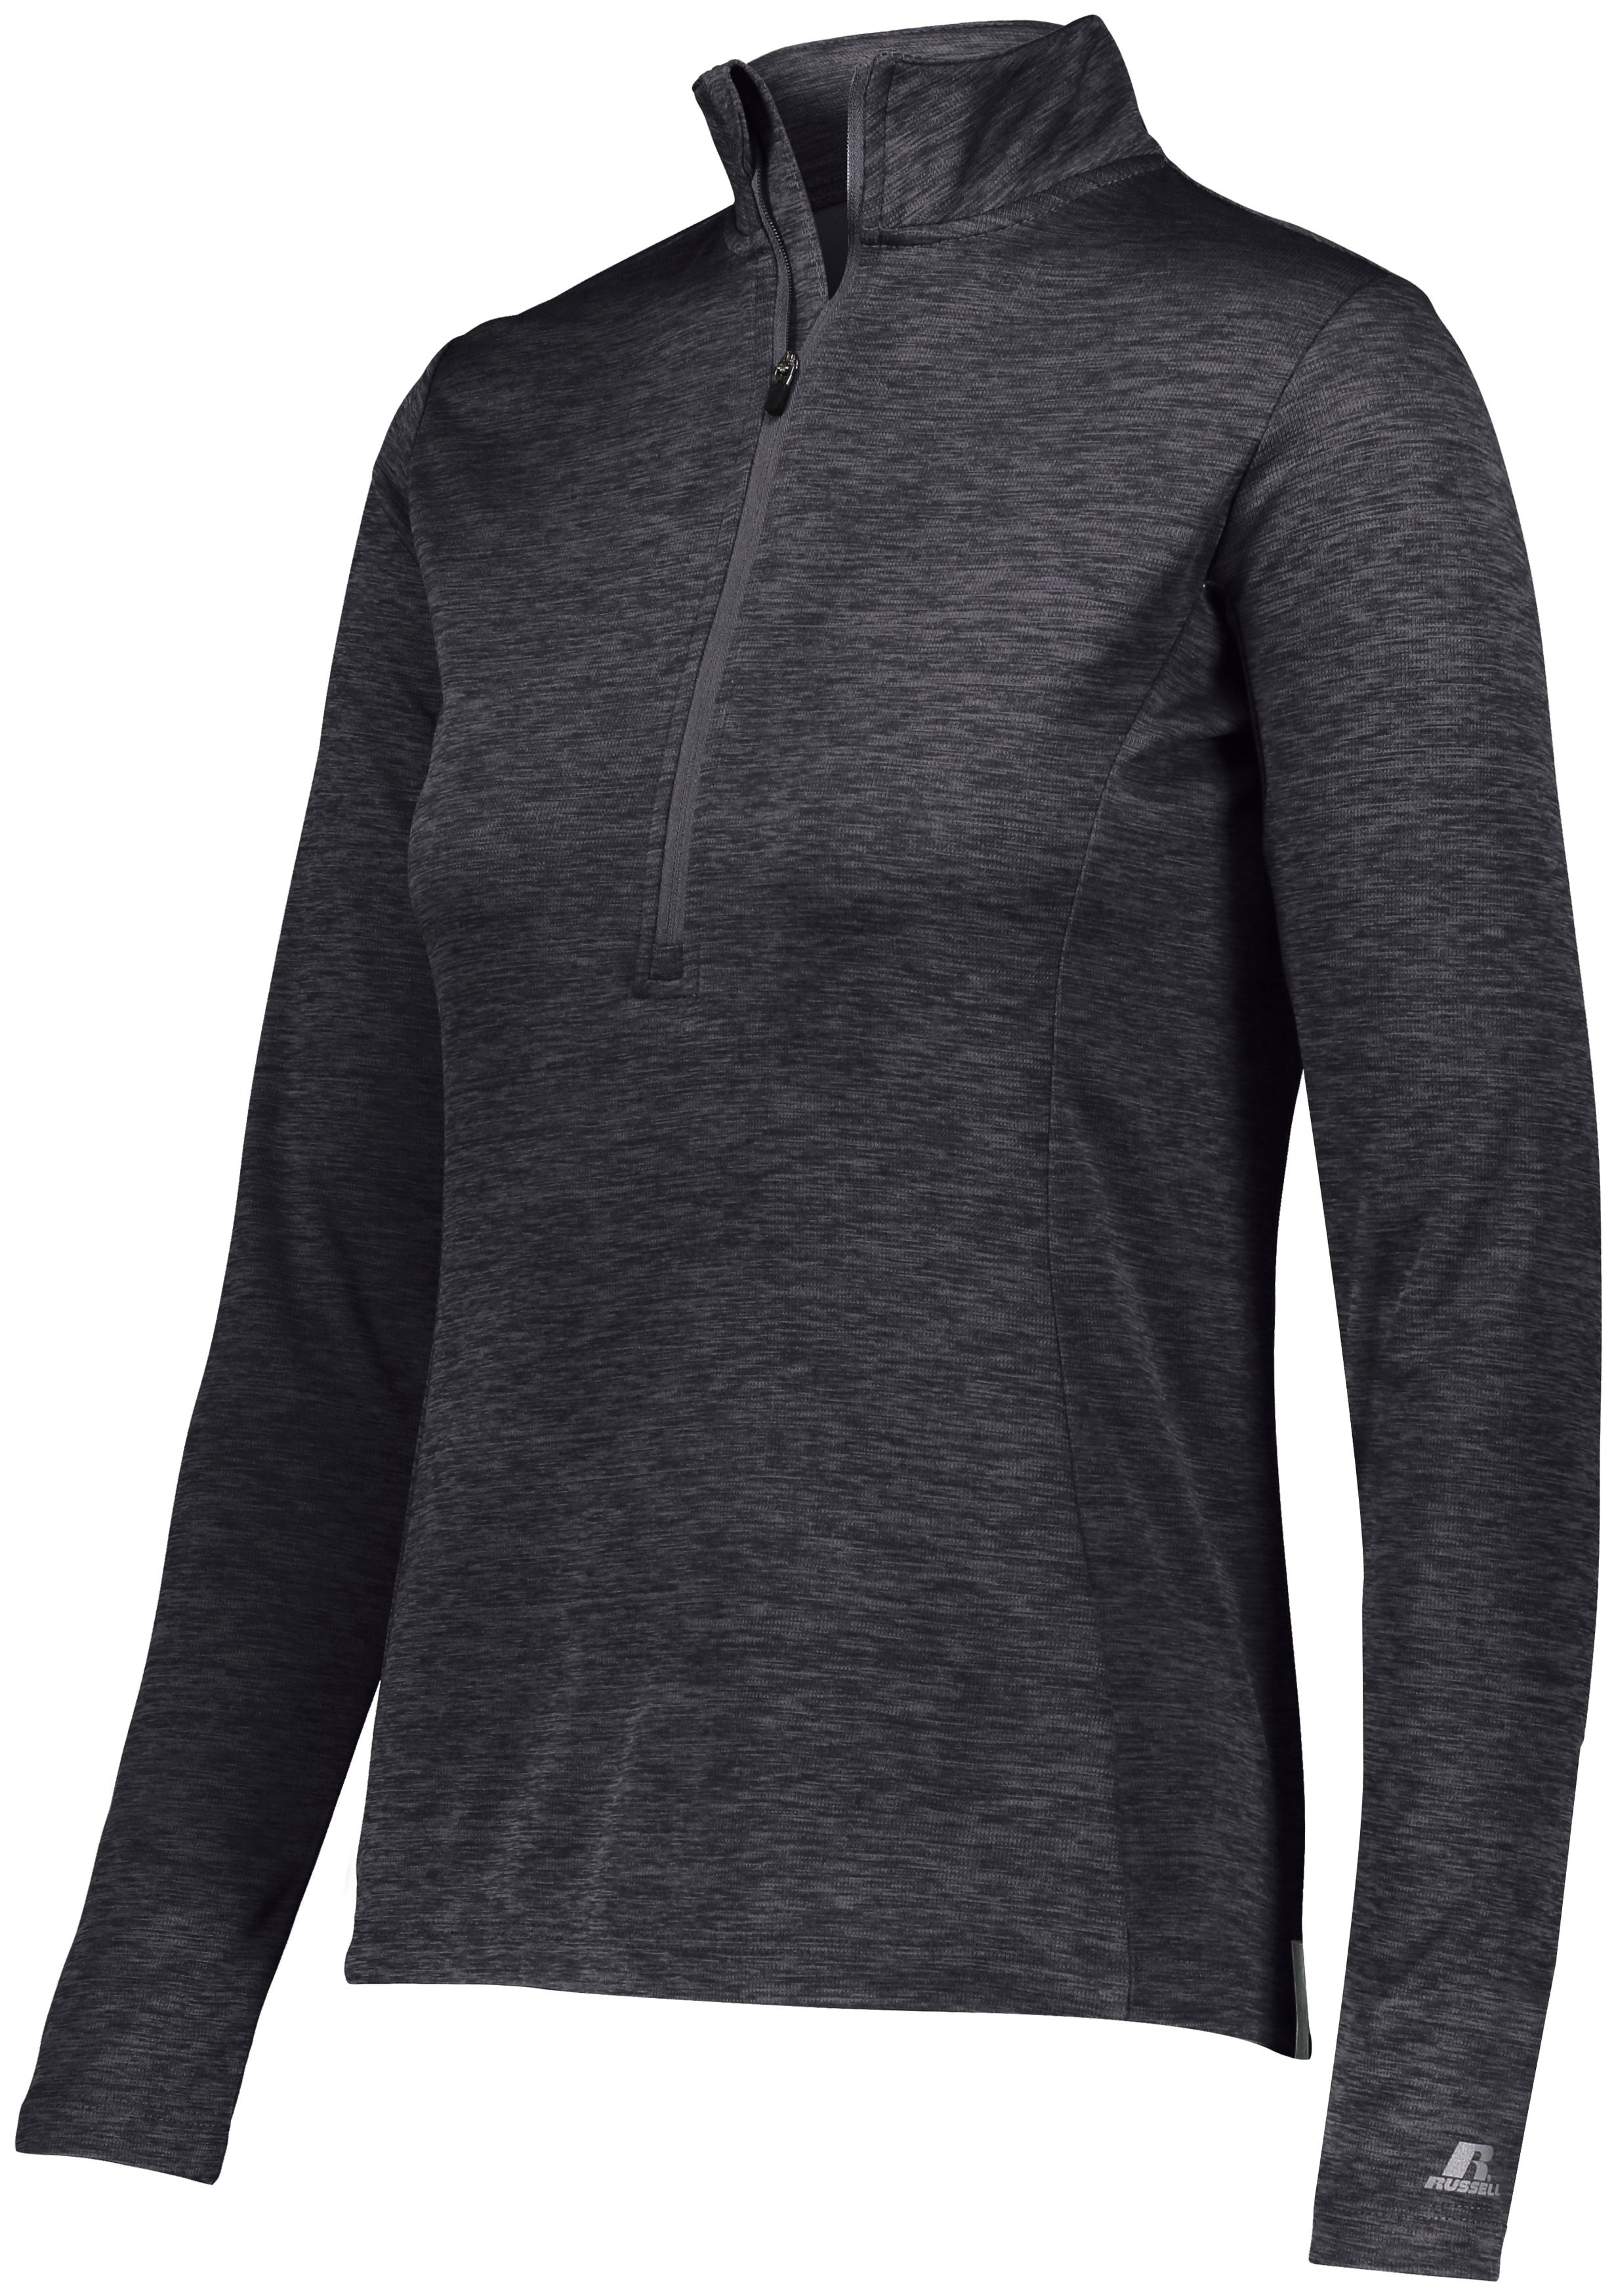 Russell Athletic Ladies Dri-Power Lightweight 1/4 Zip Pullover in Stealth  -Part of the Ladies, Russell-Athletic-Products, Shirts product lines at KanaleyCreations.com